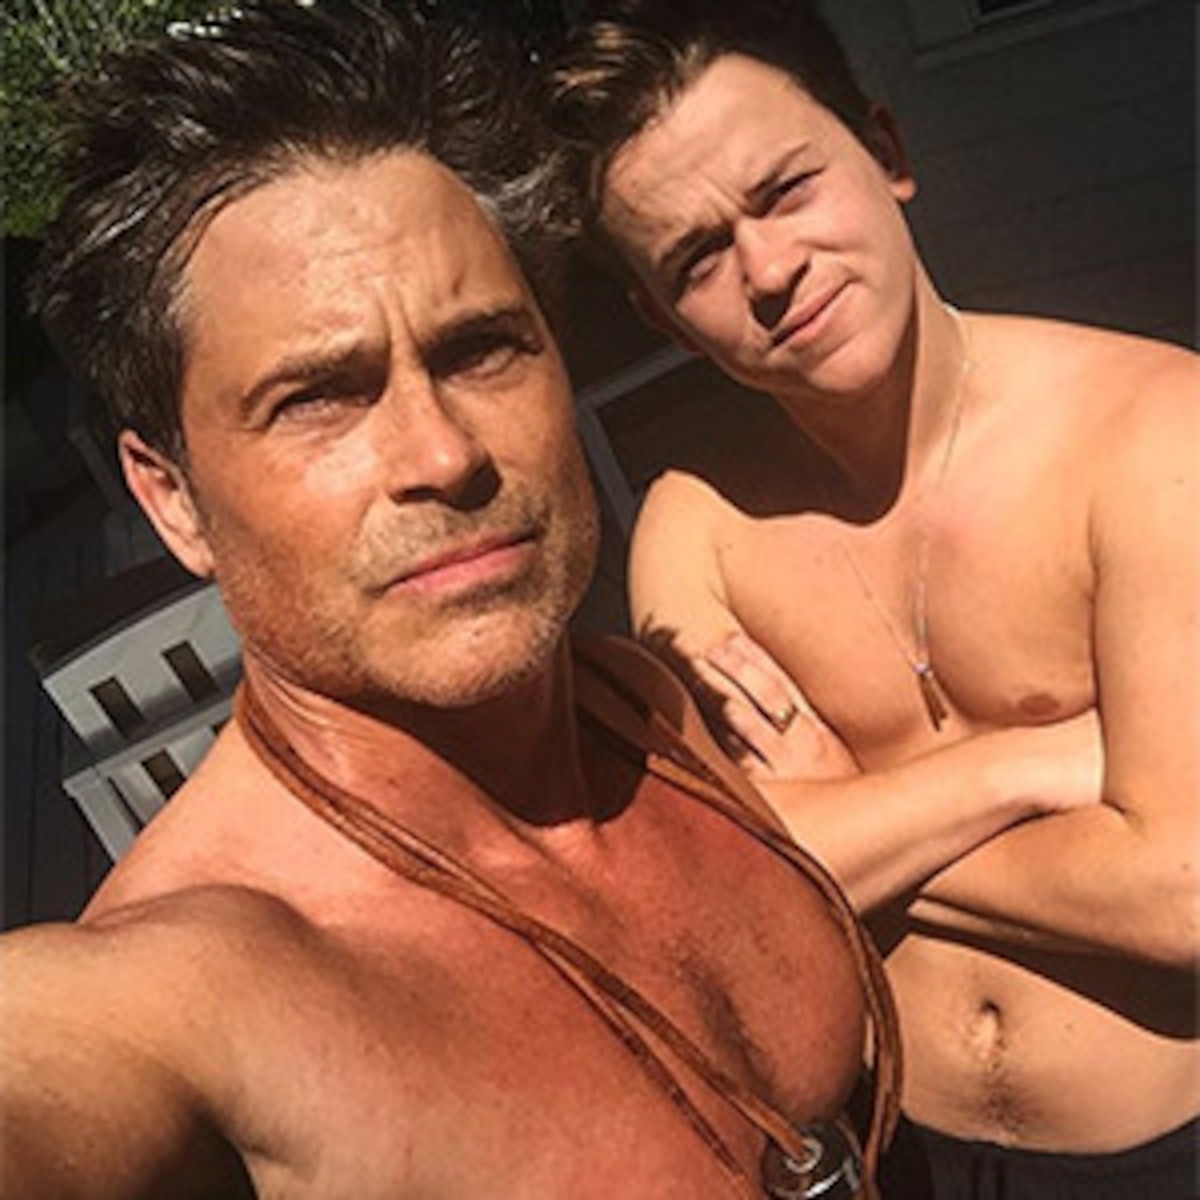 charles flemion recommends rob lowe naked pics pic